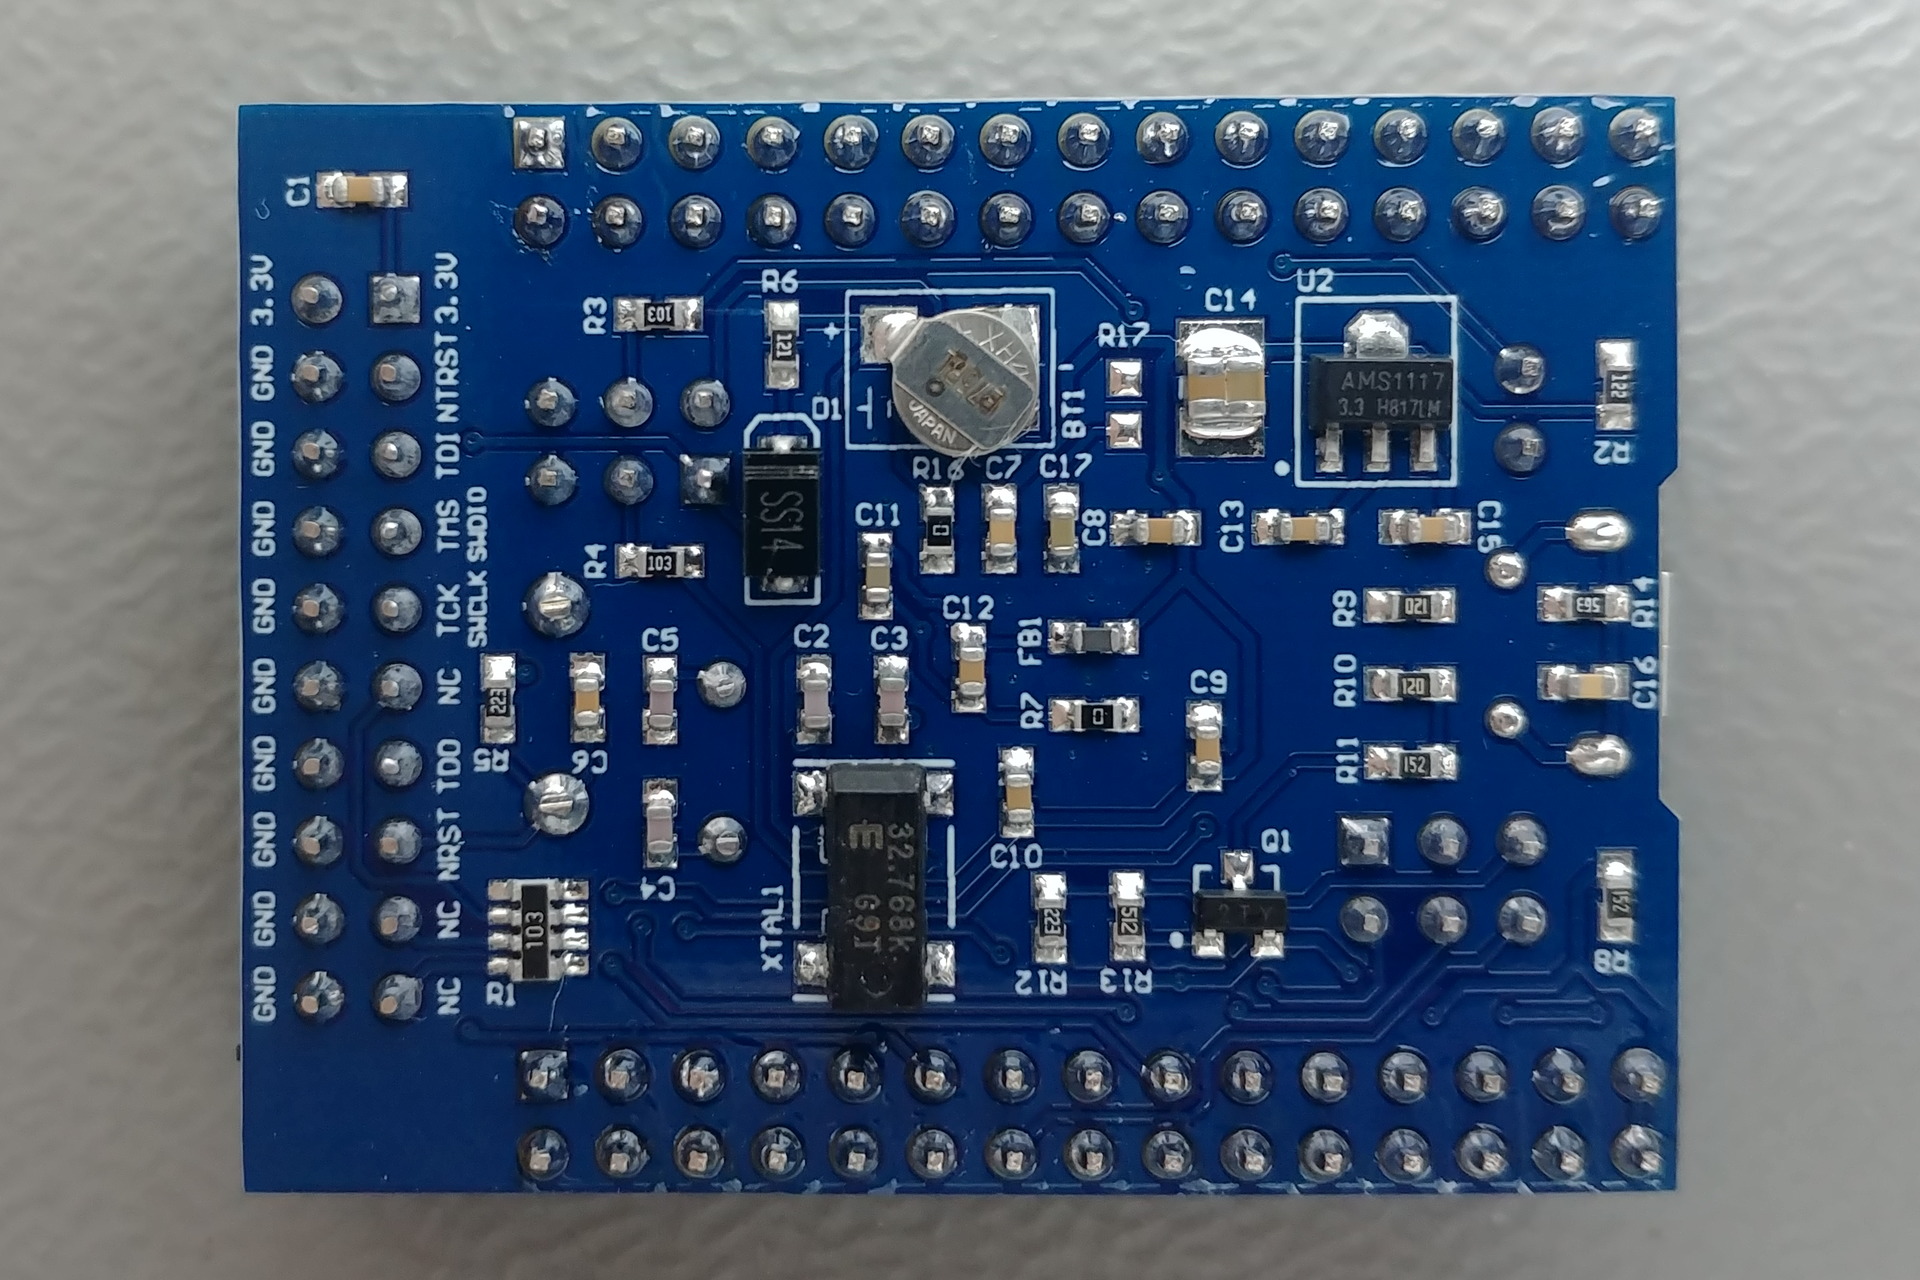 STM32F Core Board: Bottom view